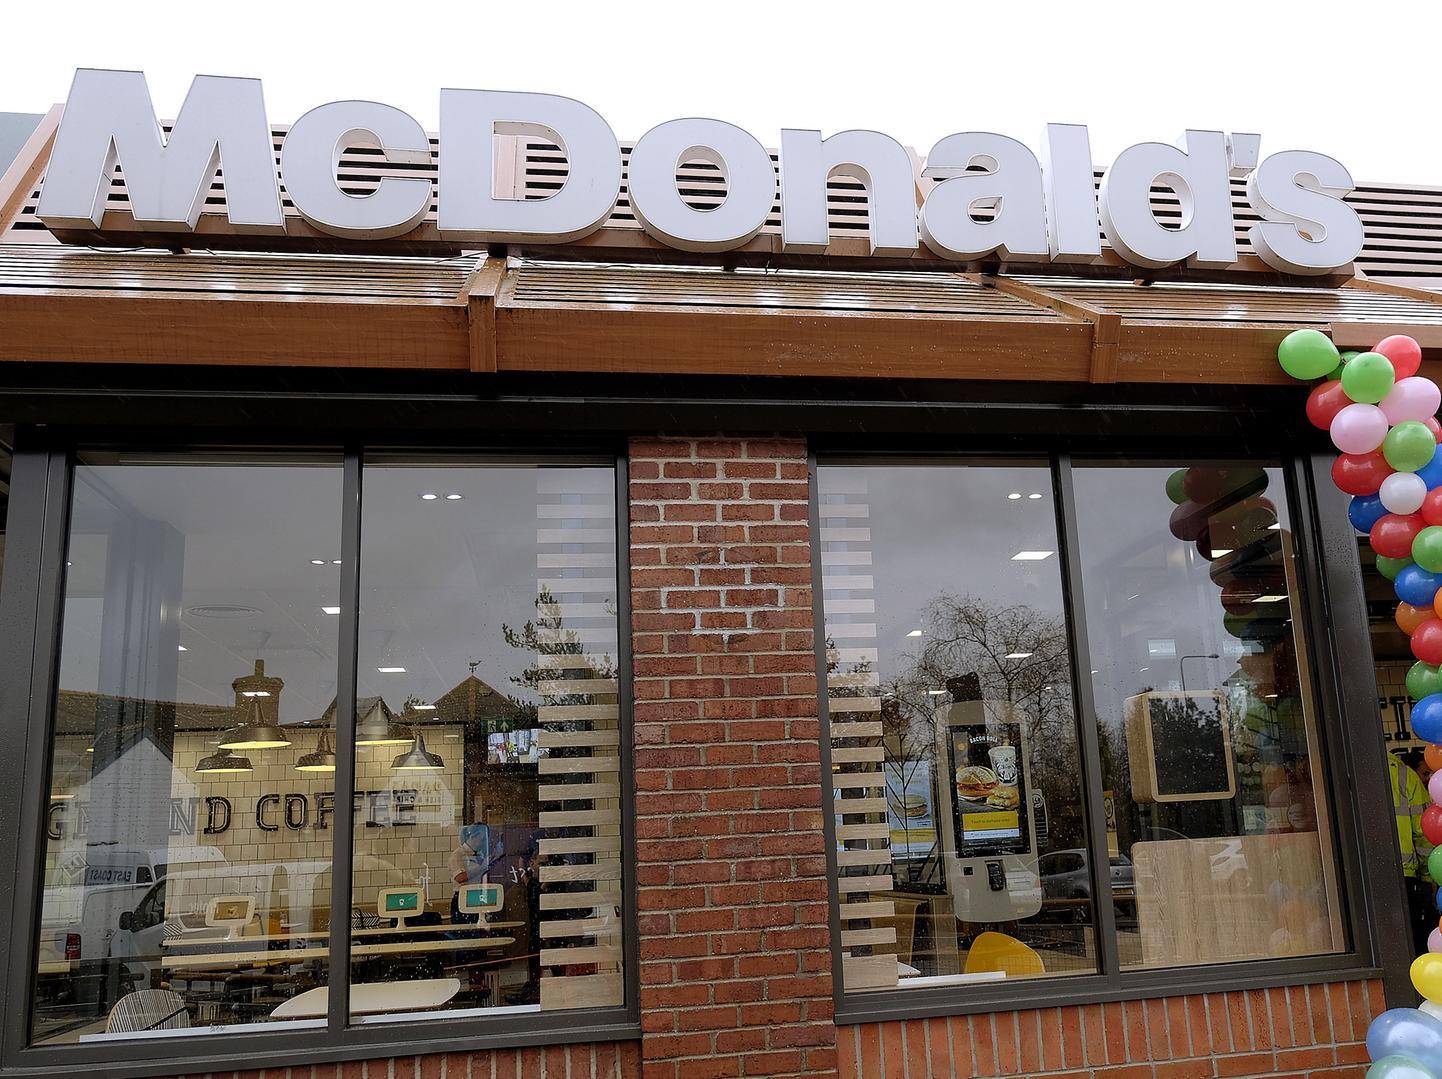 The McDonald's restaurant at Eastfield has reopened after a makeover.